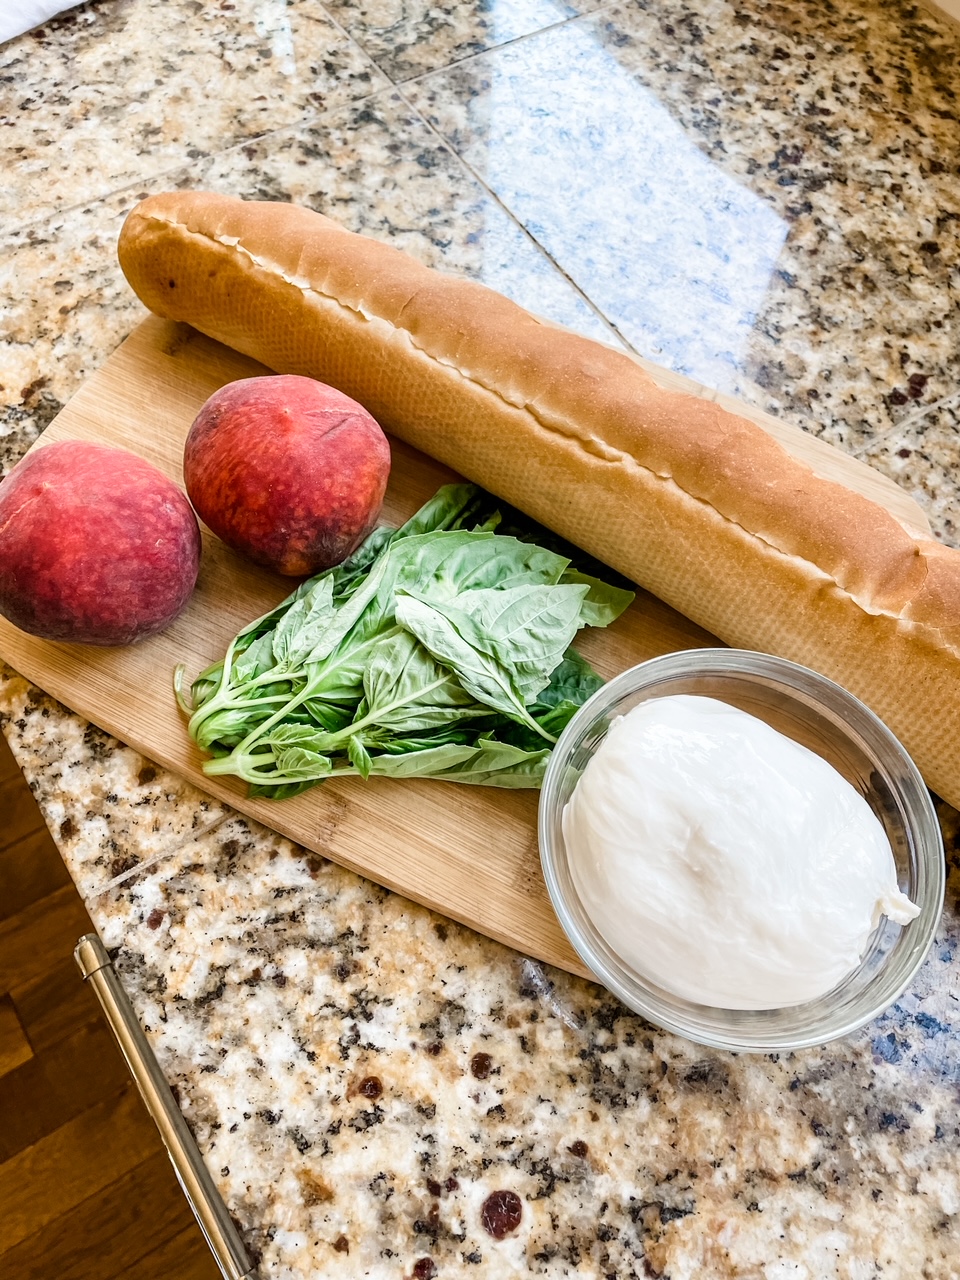 The ingredients for the Fresh Peach and Burrata Bruschetta - a loaf of bread, two peaches, basil leaves, and burrata, on a wooden cutting board